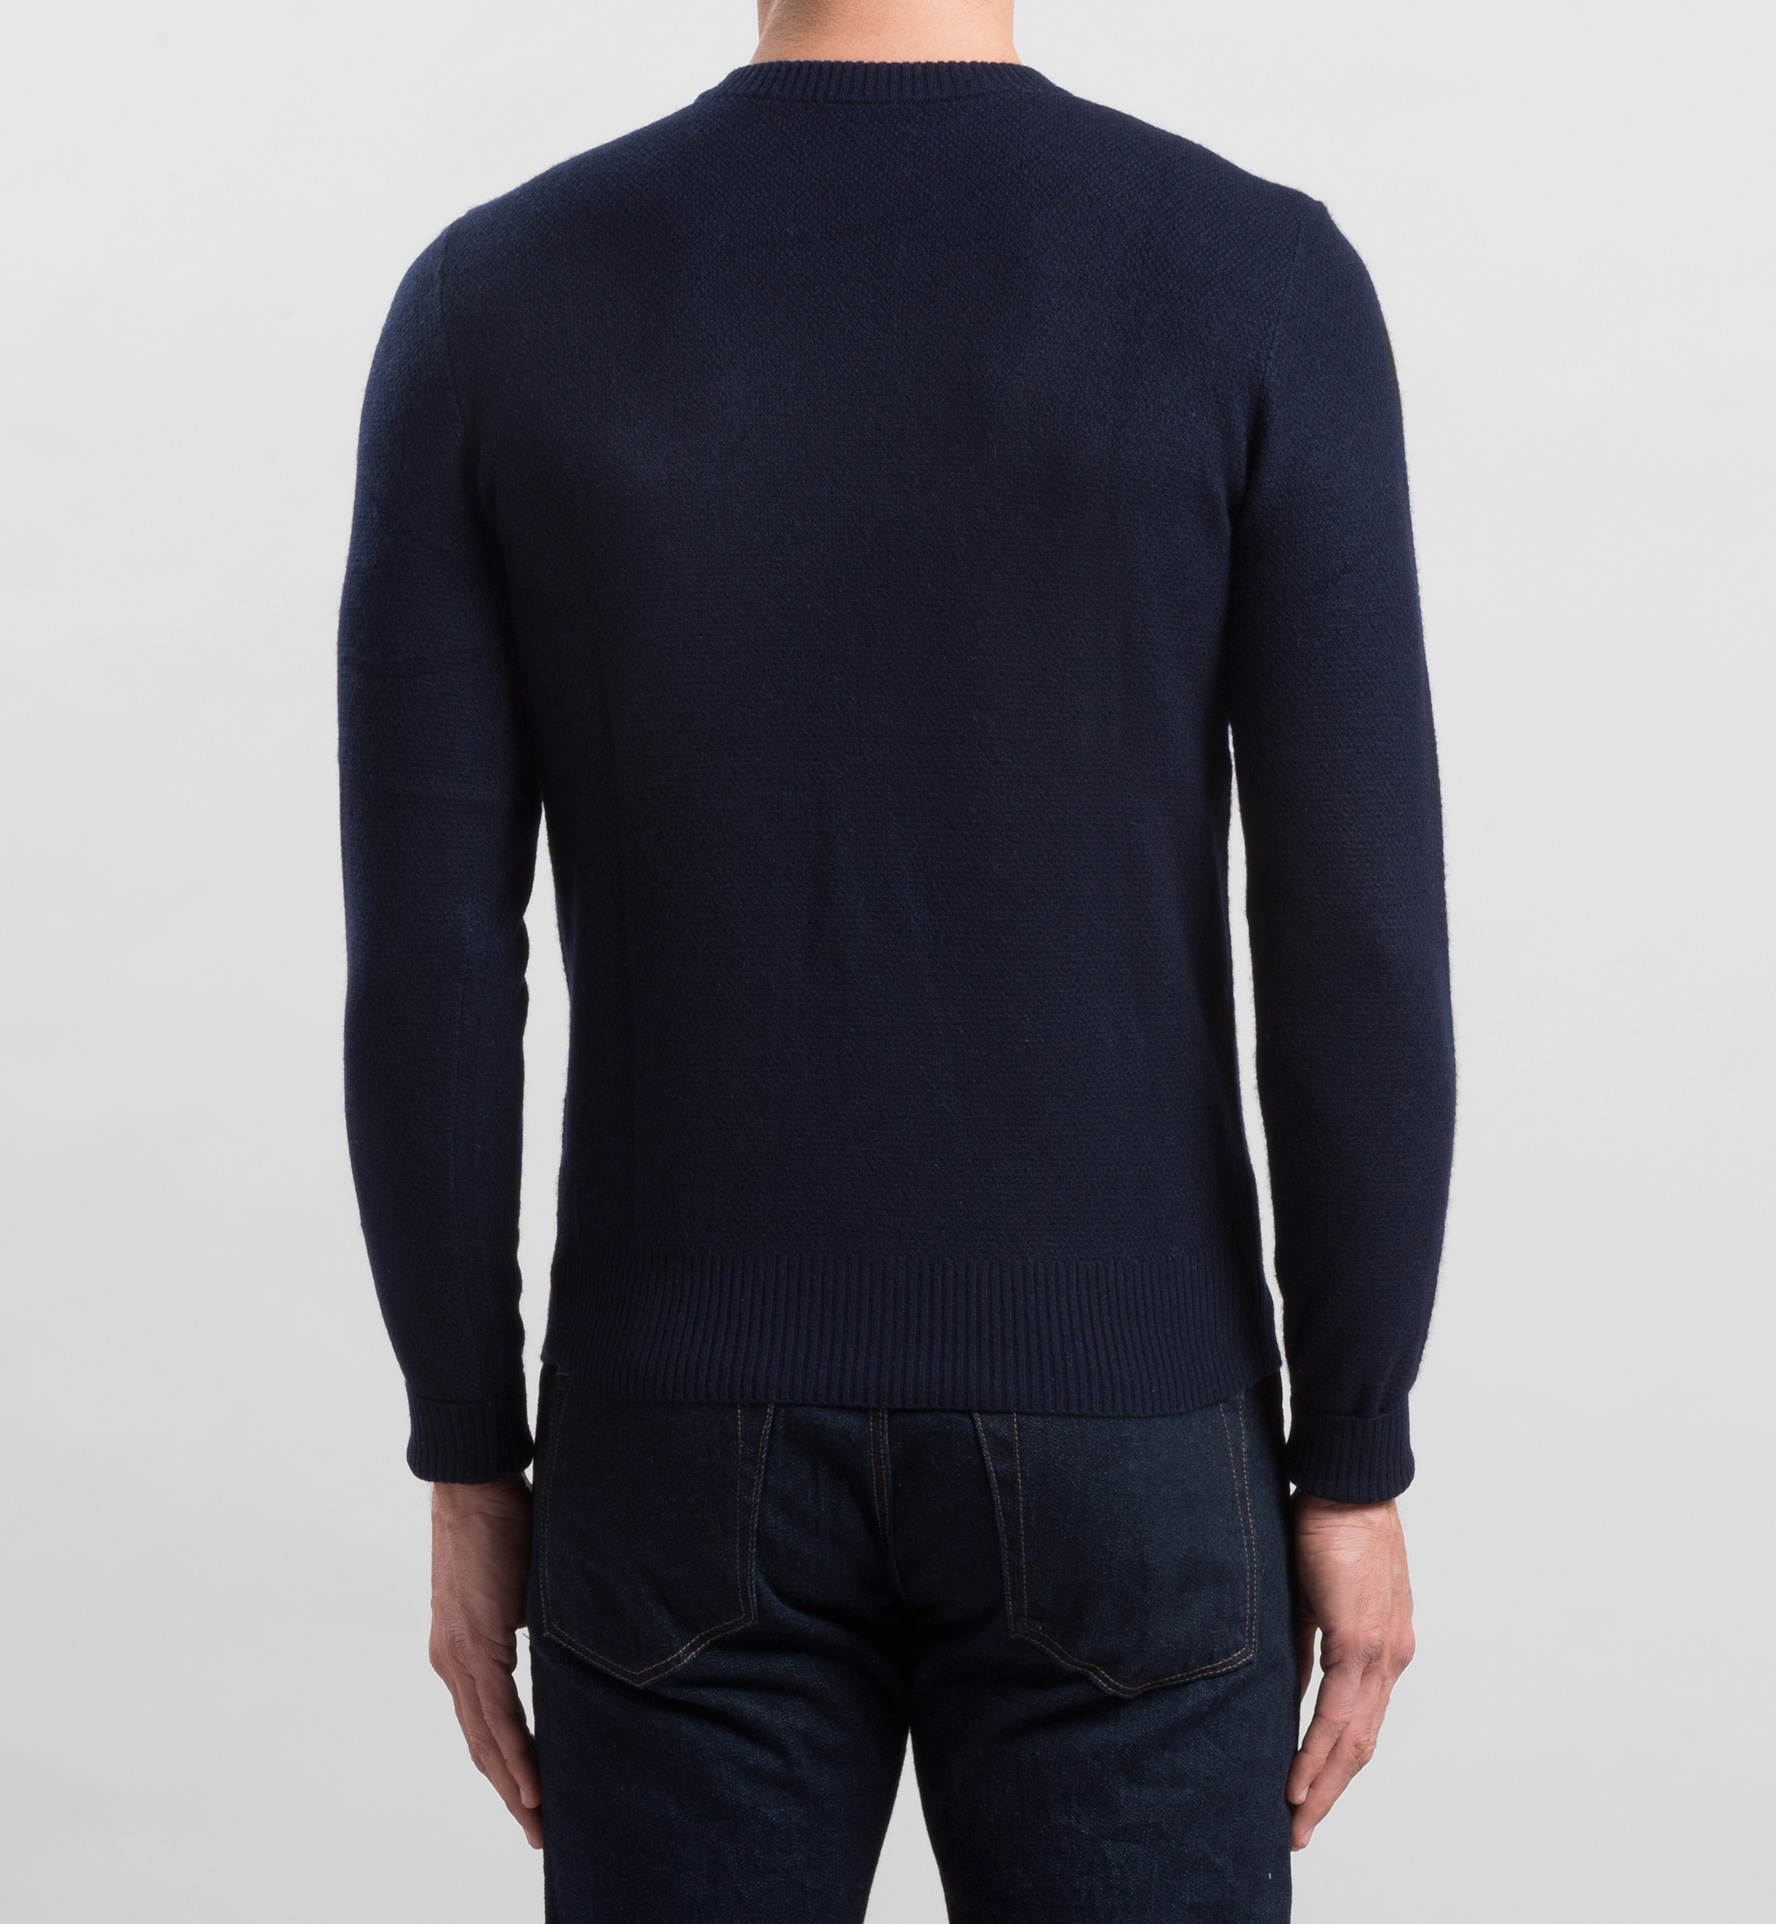 Navy Cobble Stitch Cashmere Sweater by Proper Cloth